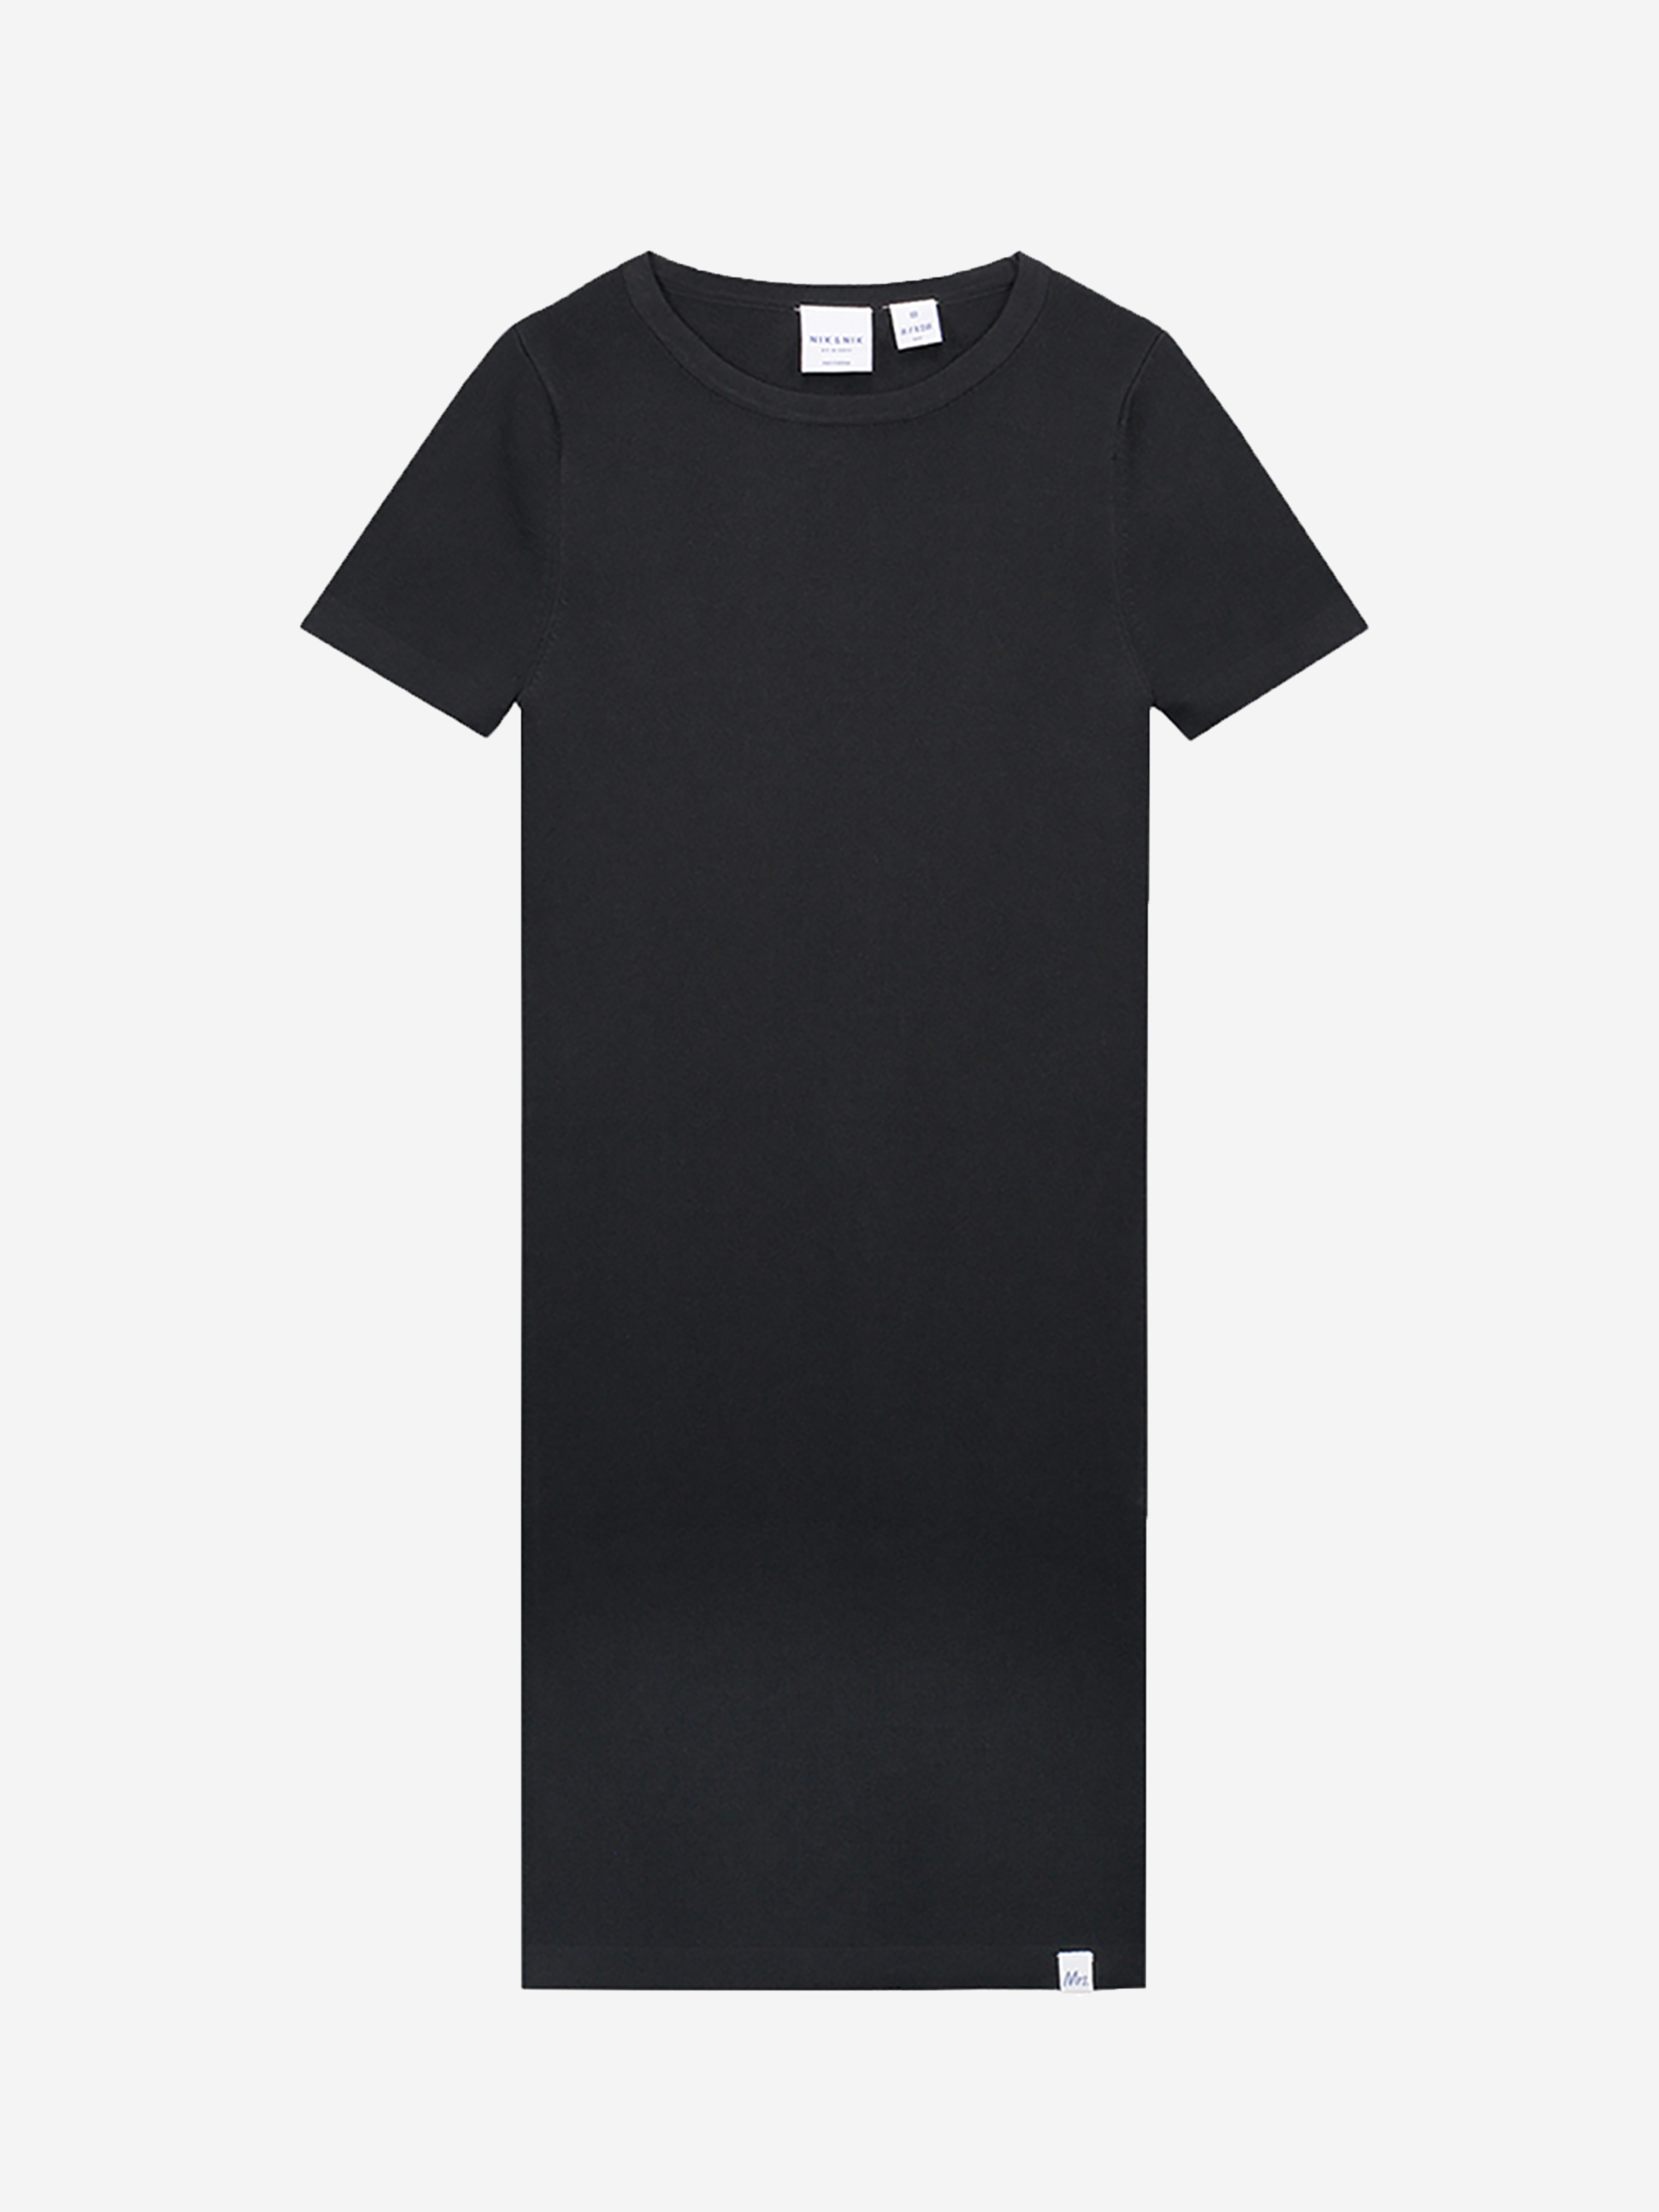 Black dress with short sleeves